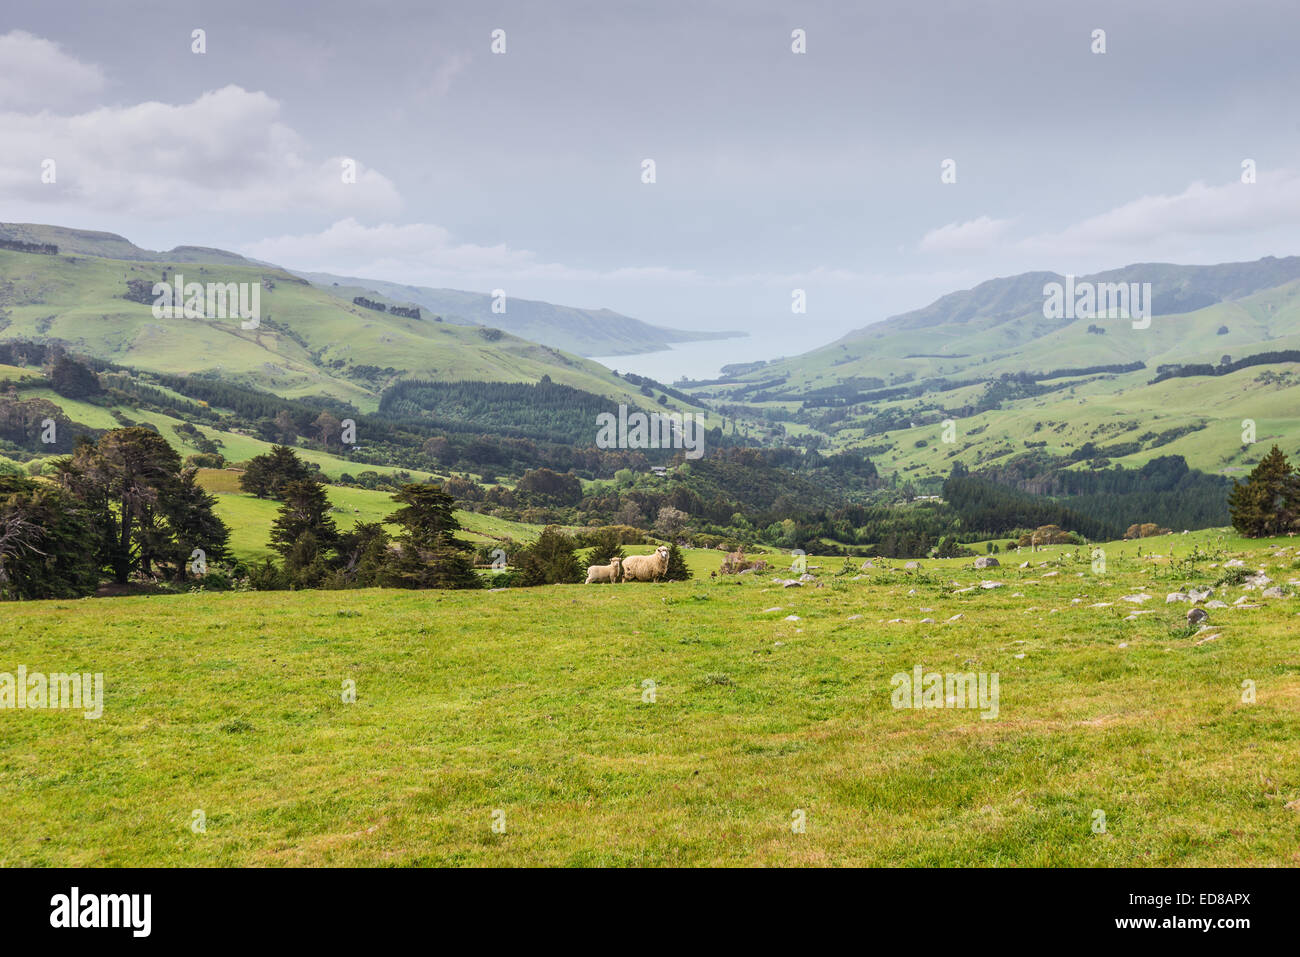 Two lambs grazing on the picturesque New Zealand landscape background Stock Photo